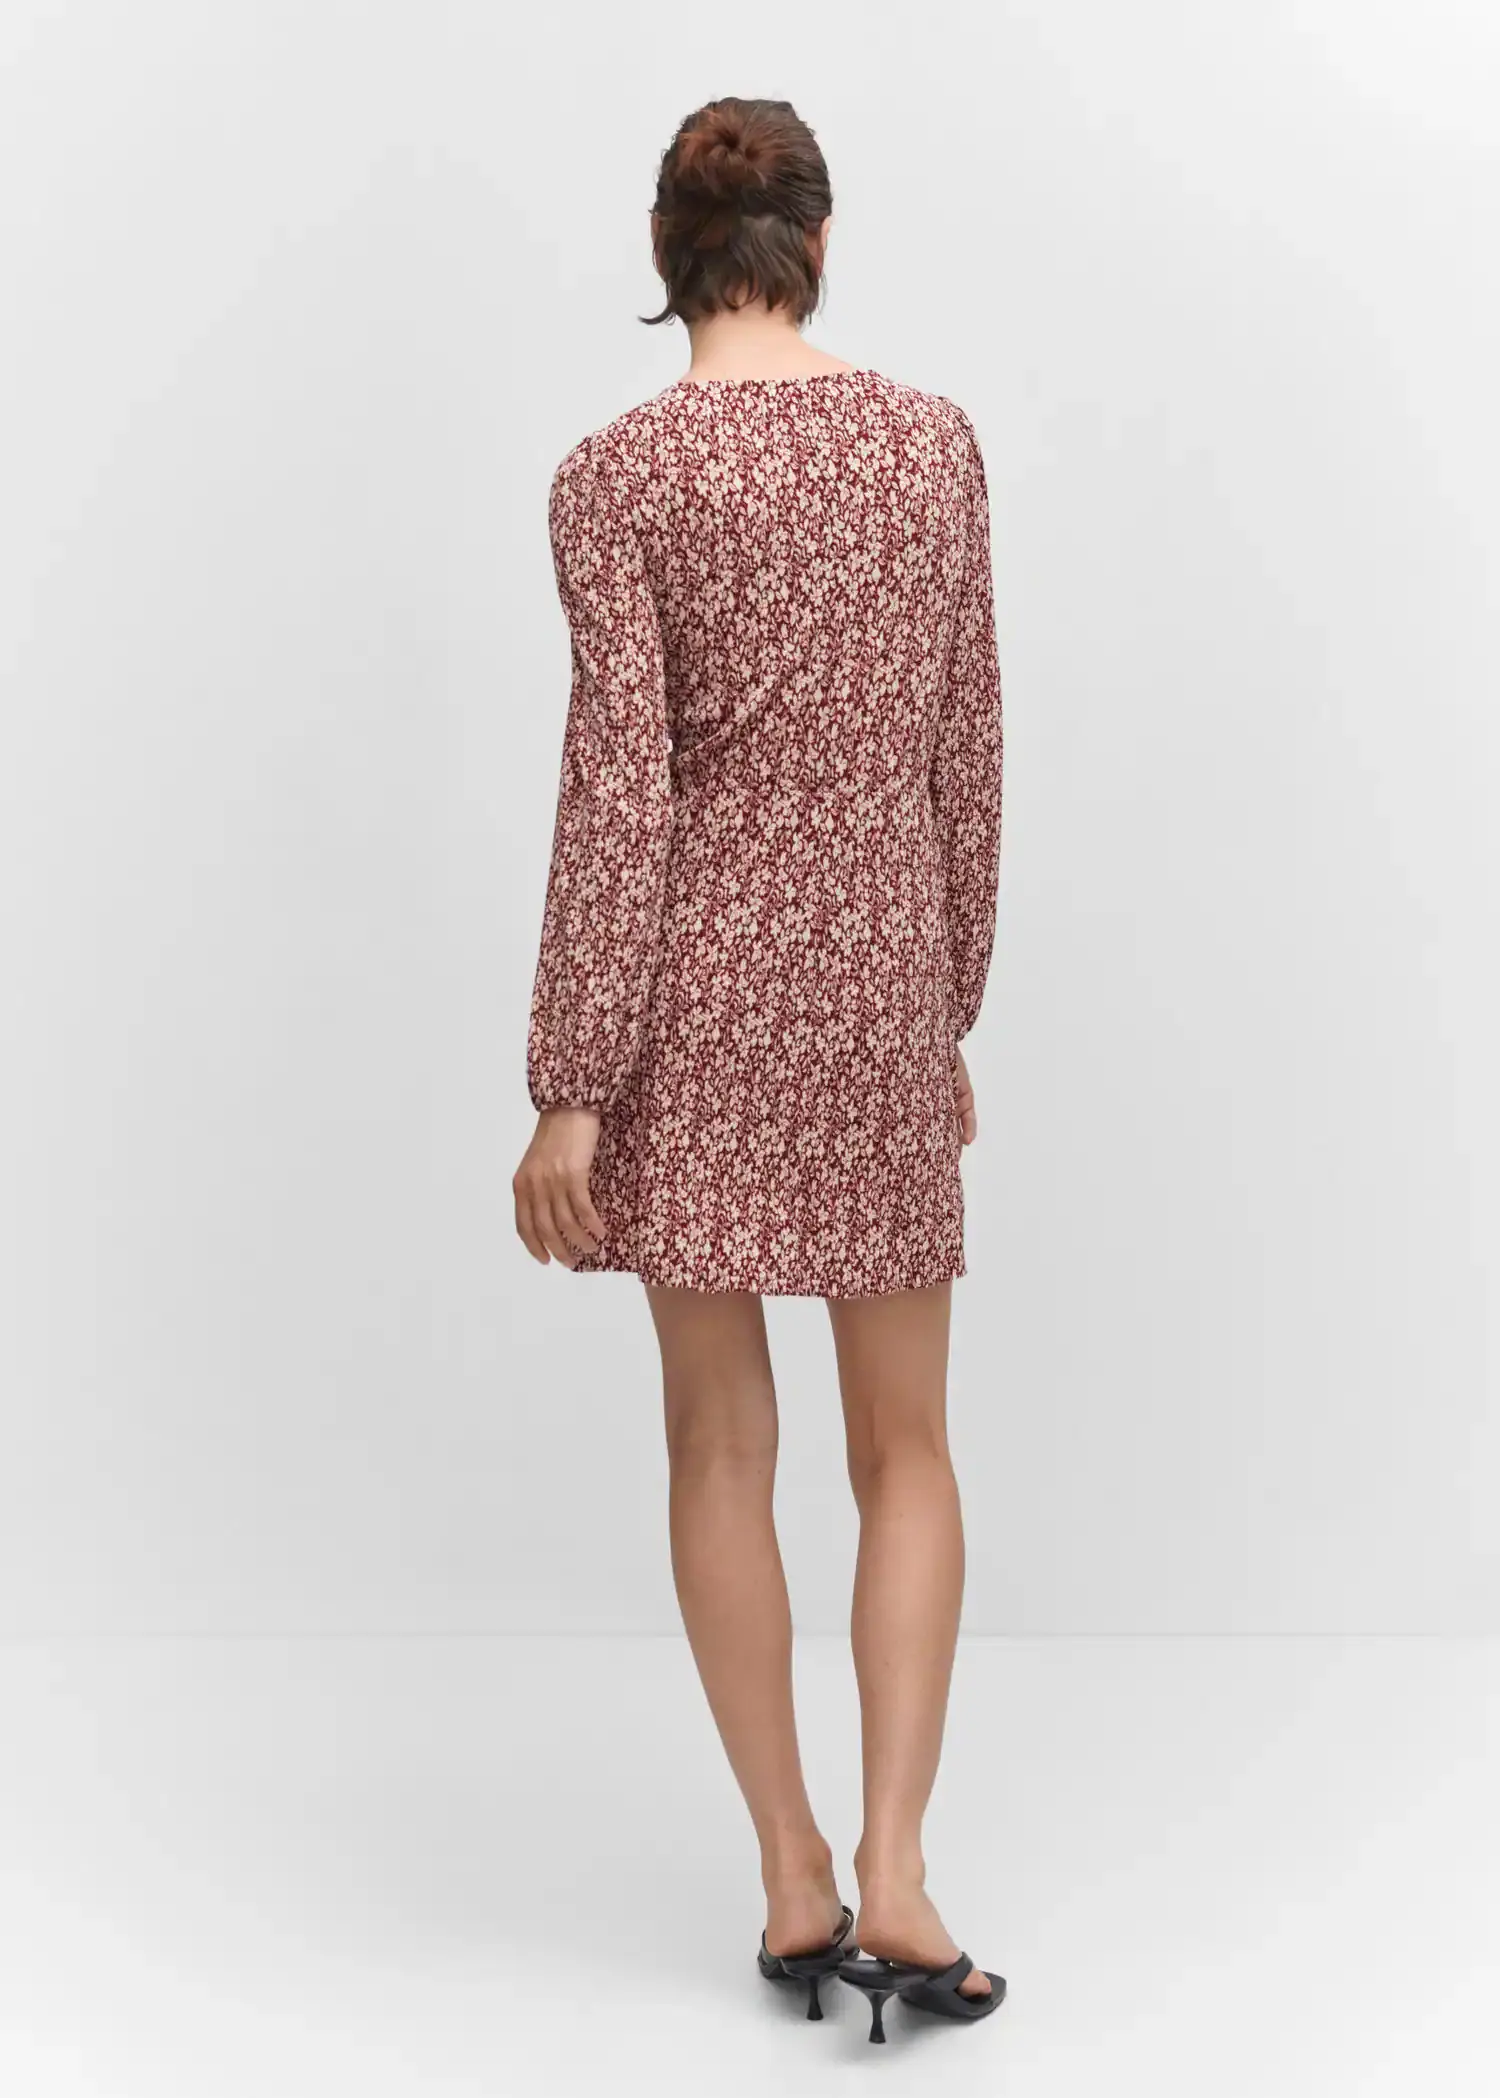 Mango Short printed dress with knot detail. 3